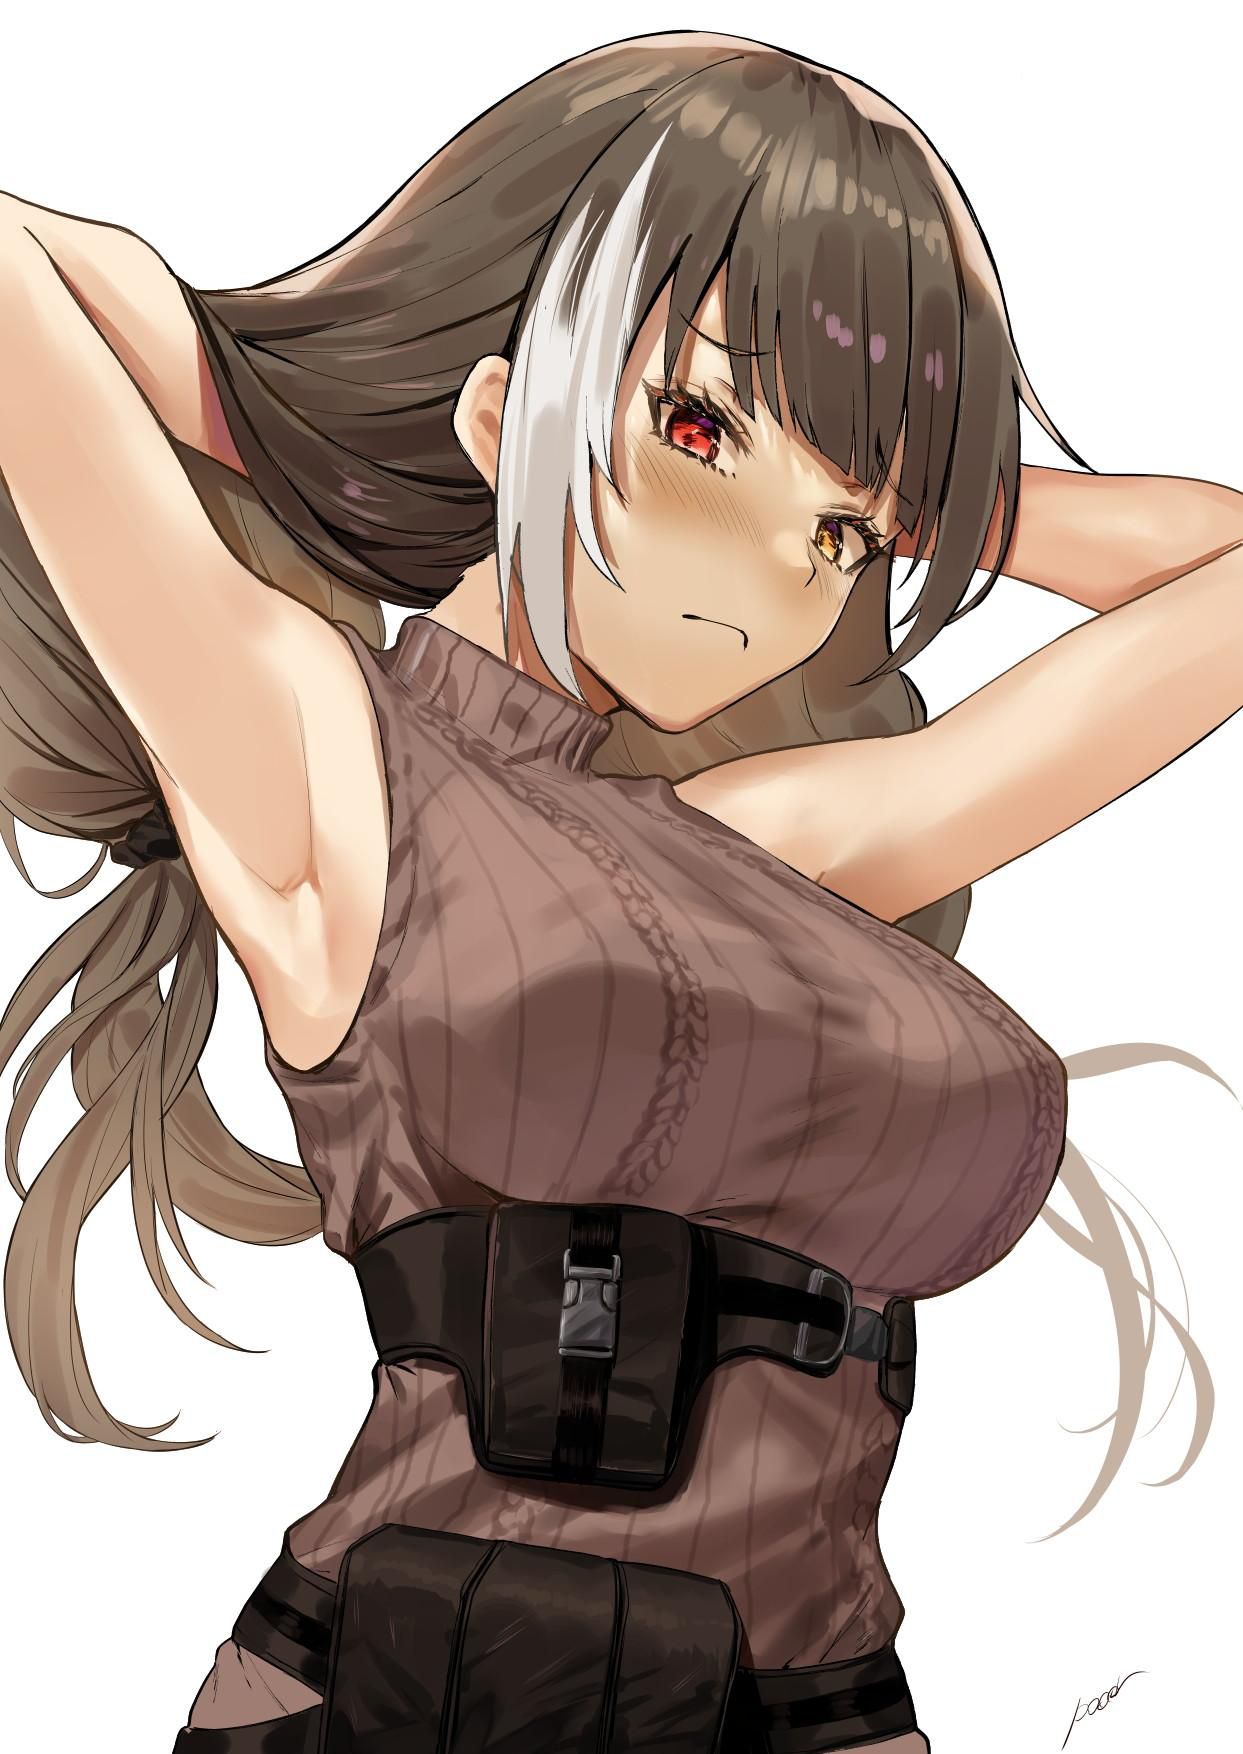 [Dolls Frontline] High-quality erotic images that can be used as RO635 wallpapers (PC/ smartphone) 7